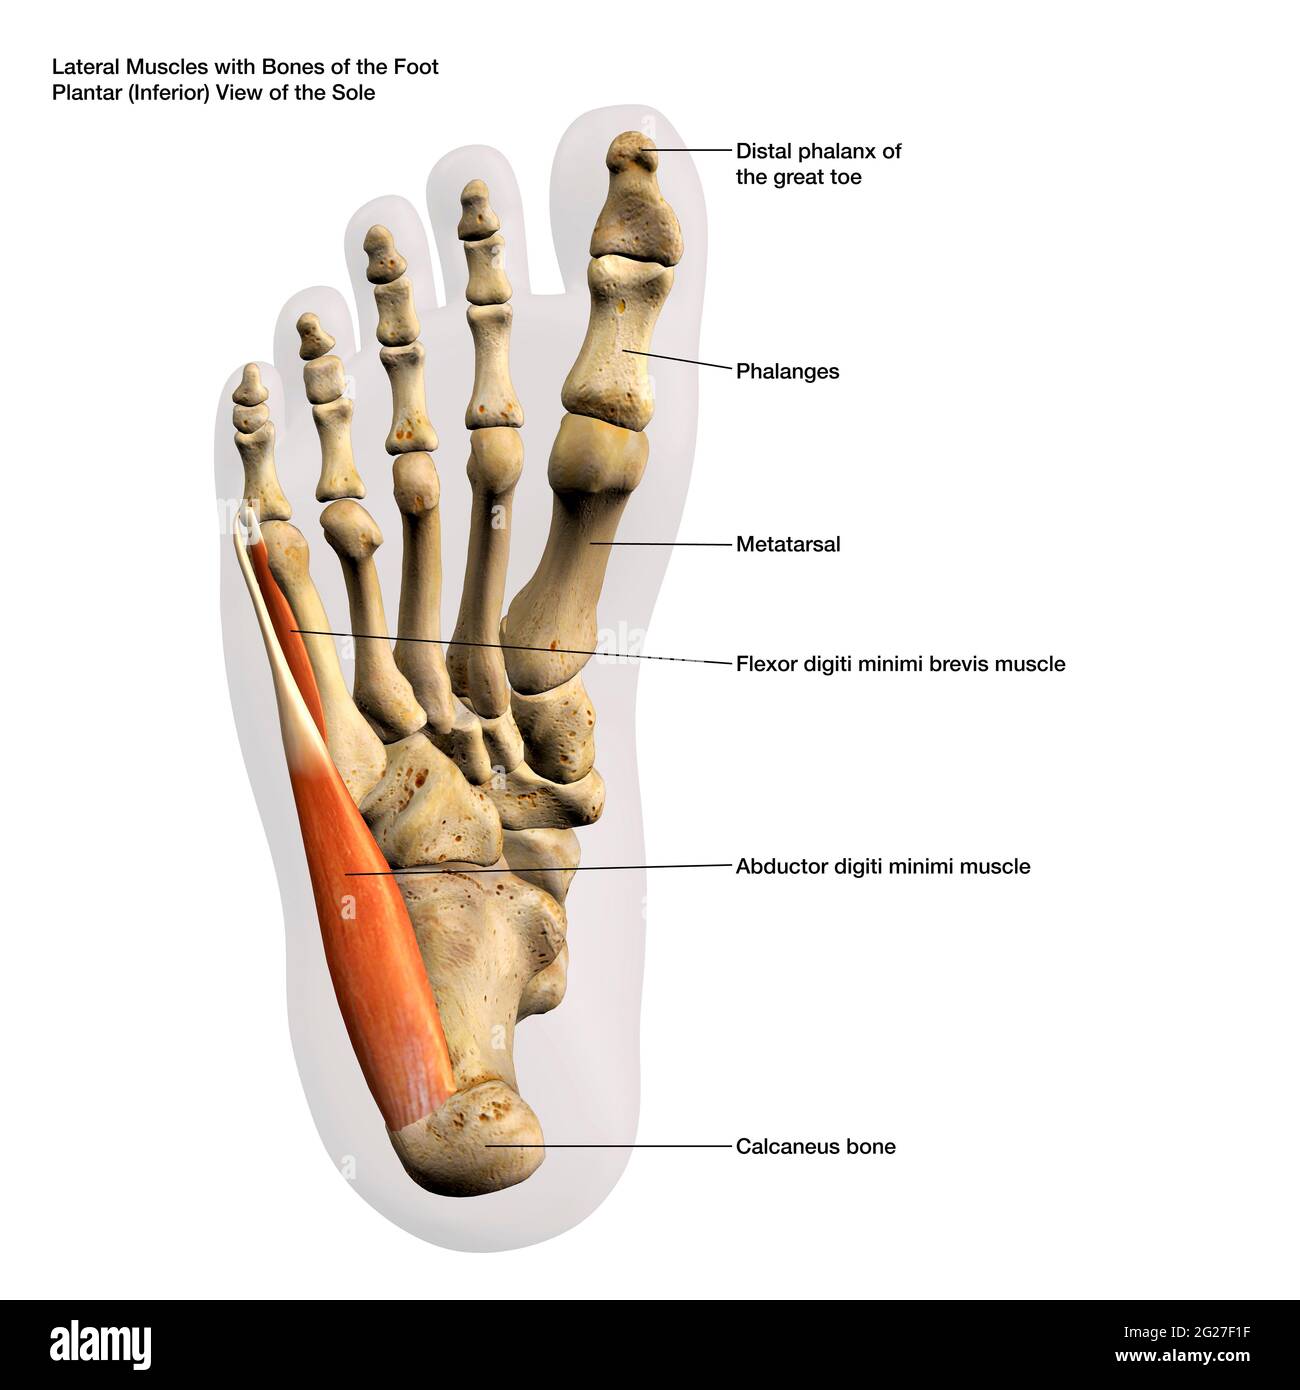 3D rendering of lateral muscles and bones of the human foot, with labels. Stock Photo